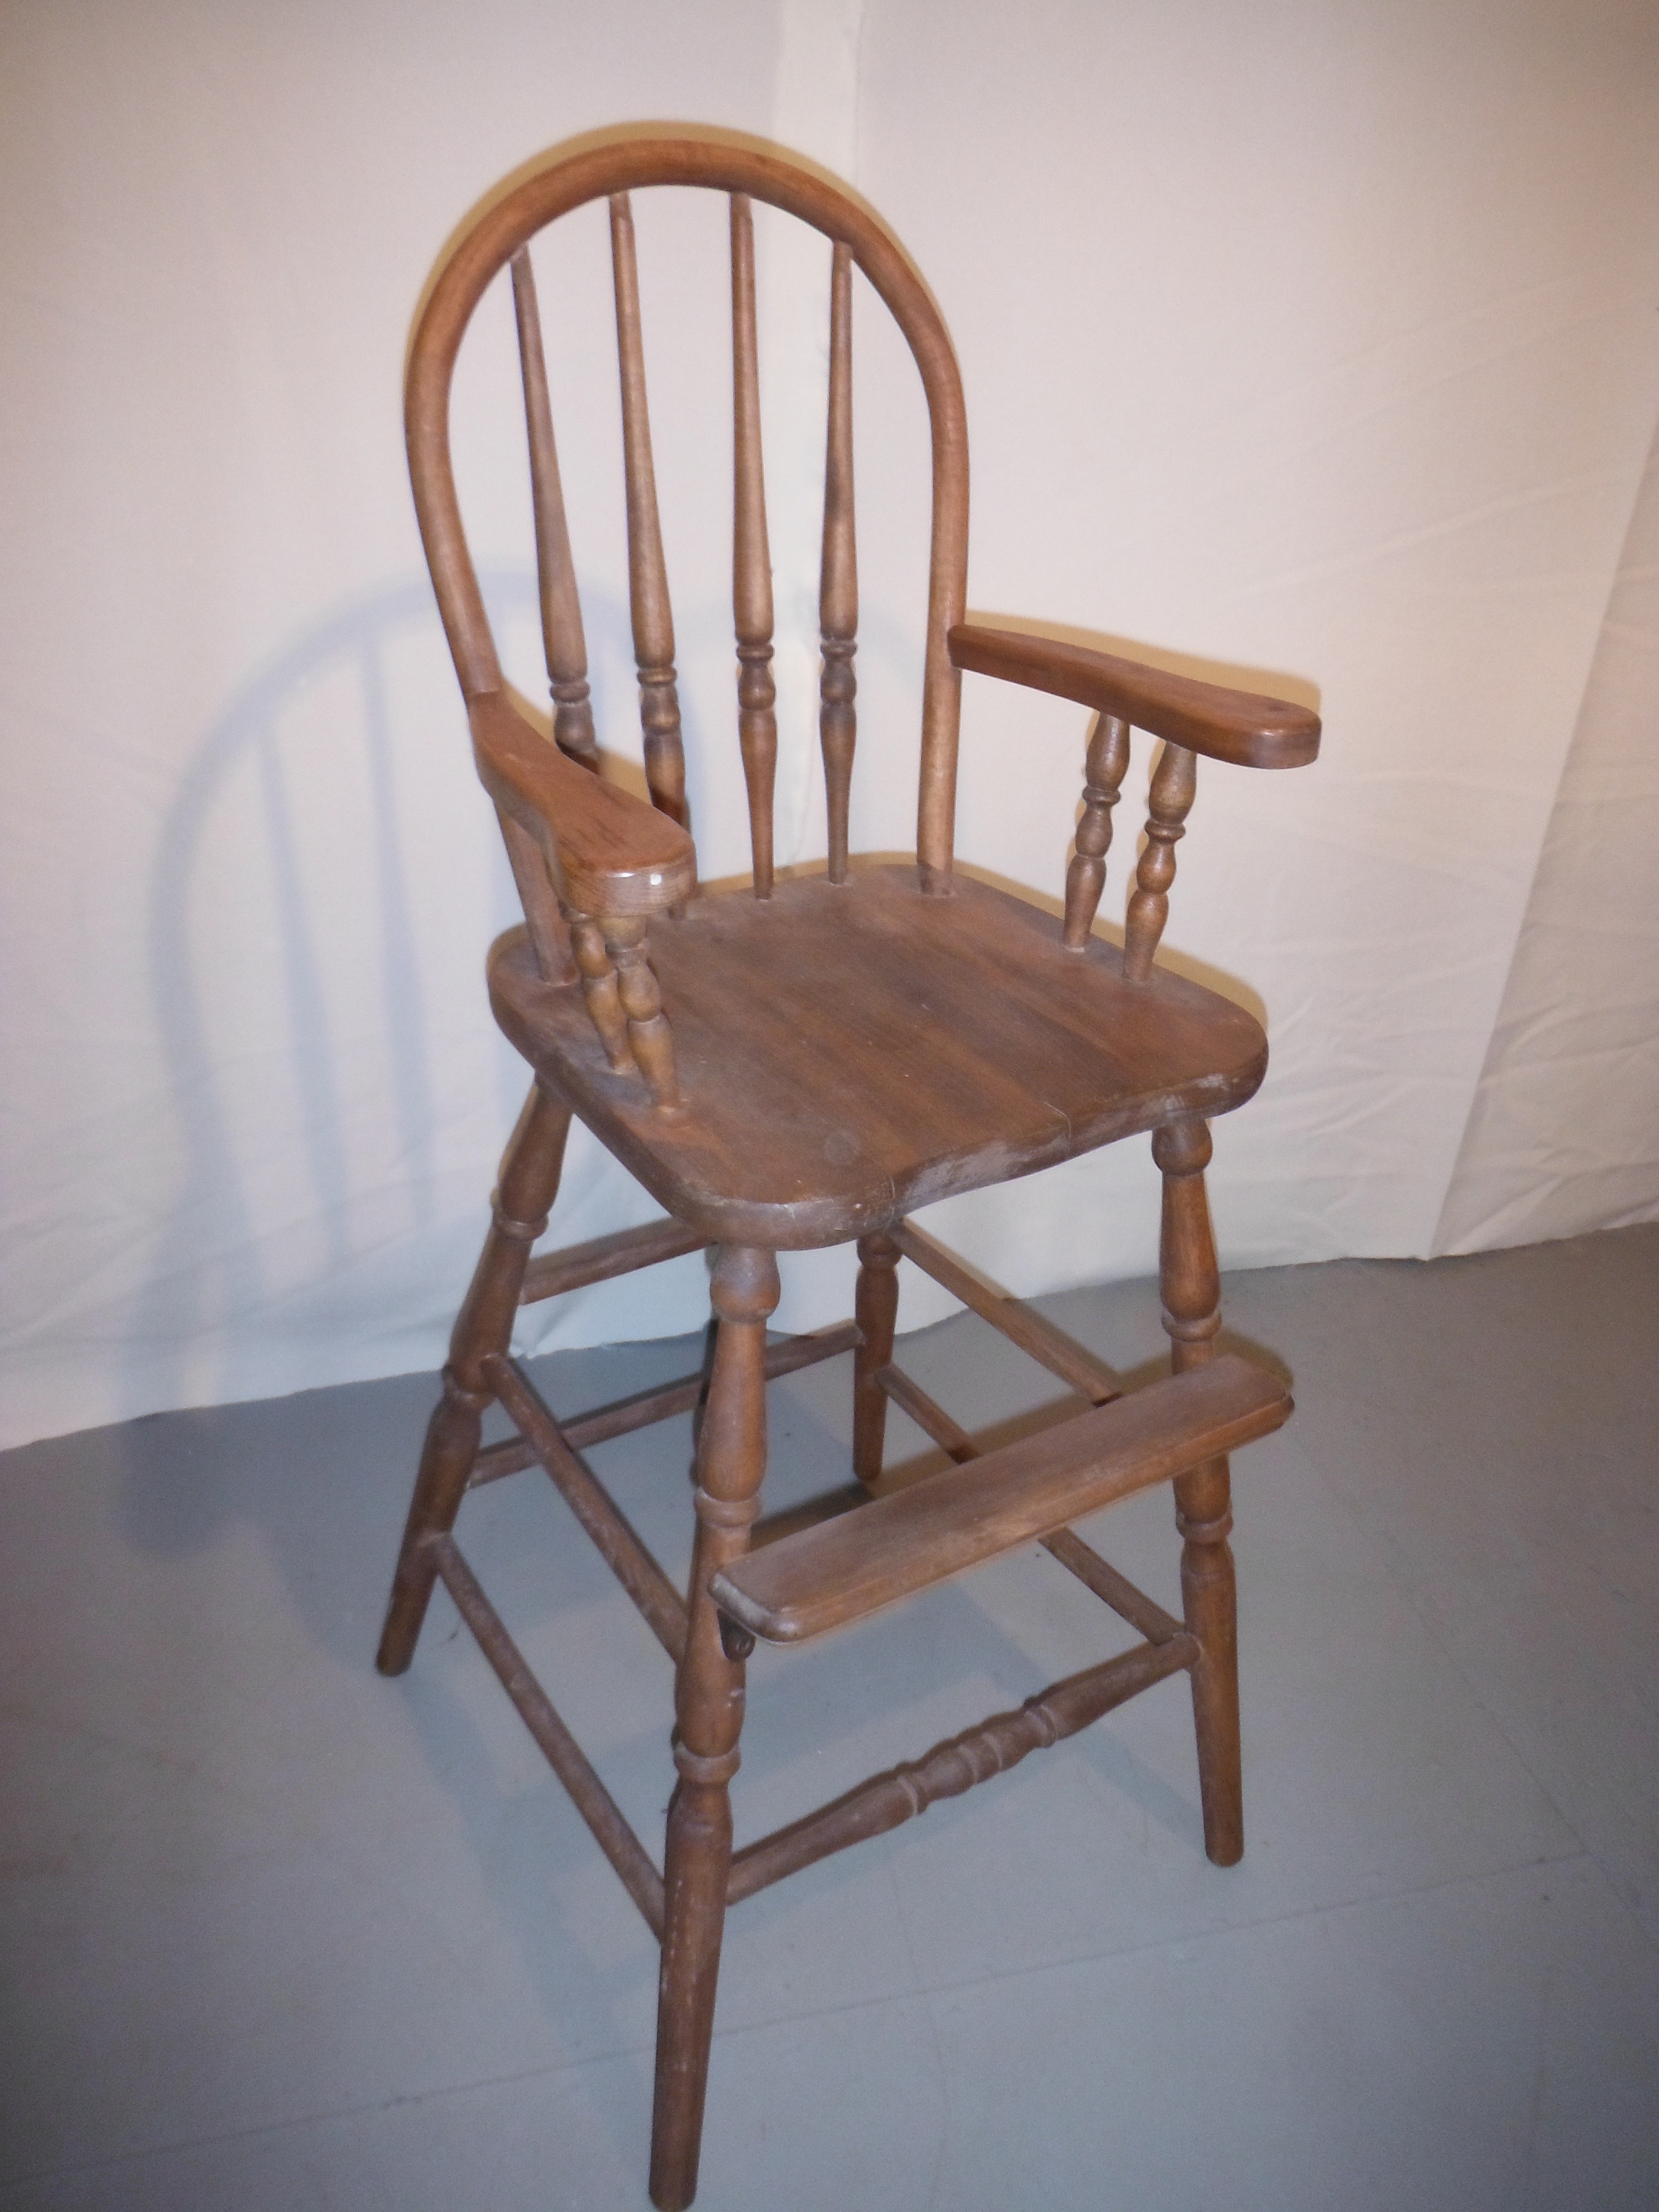 antique wooden high chair with wheels